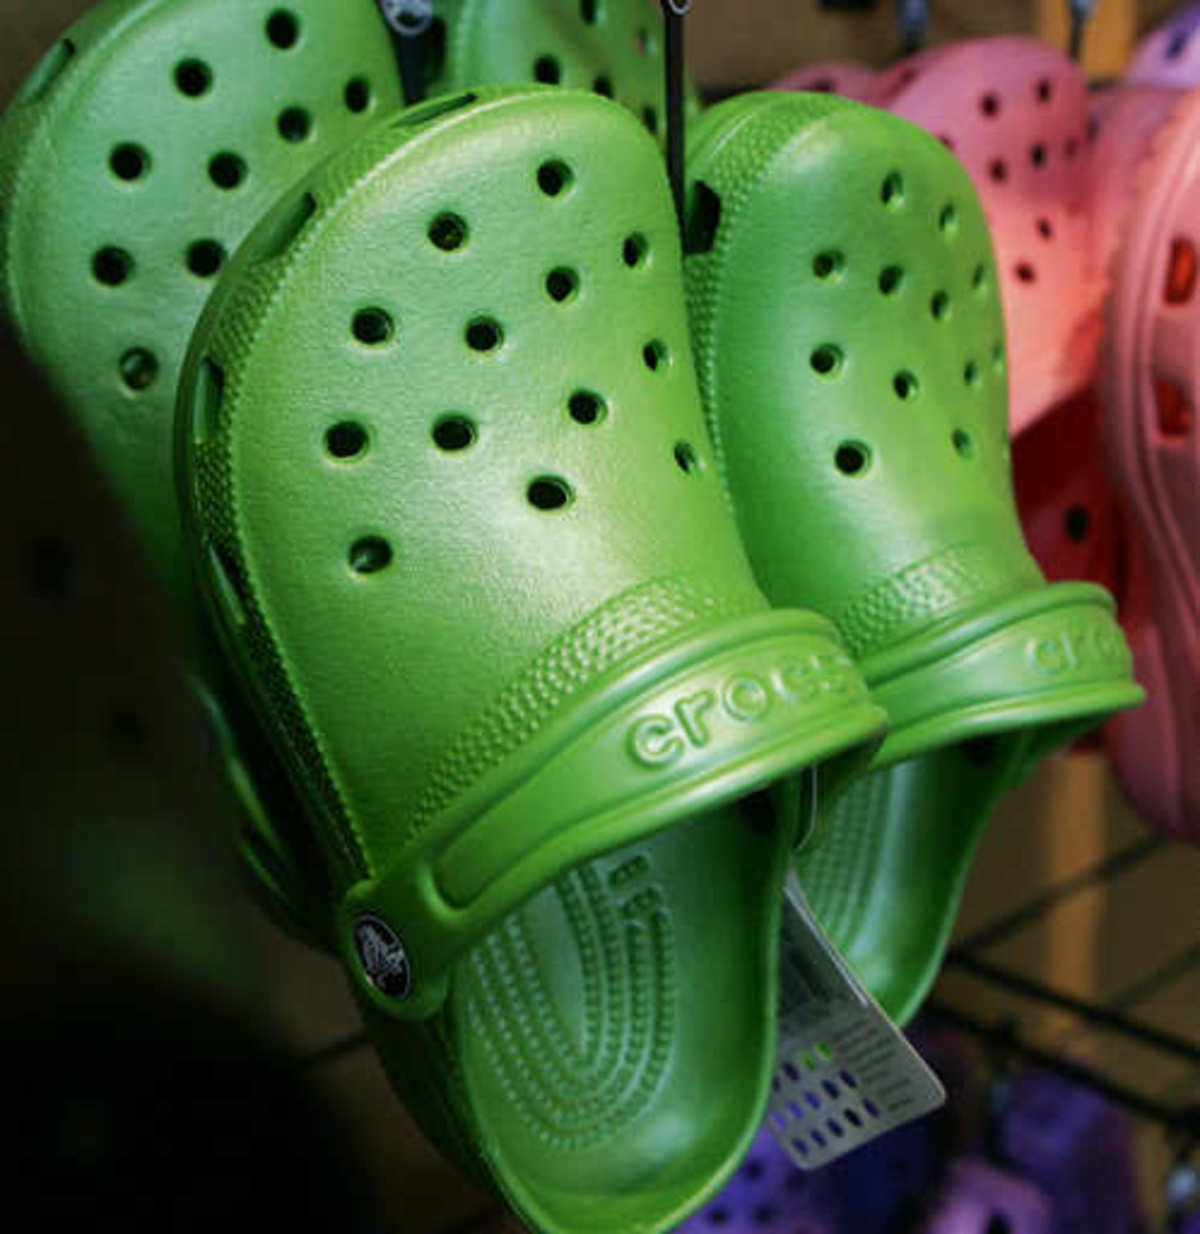 Crocs to cross 100 stores mark in India, Retail News, ET Retail